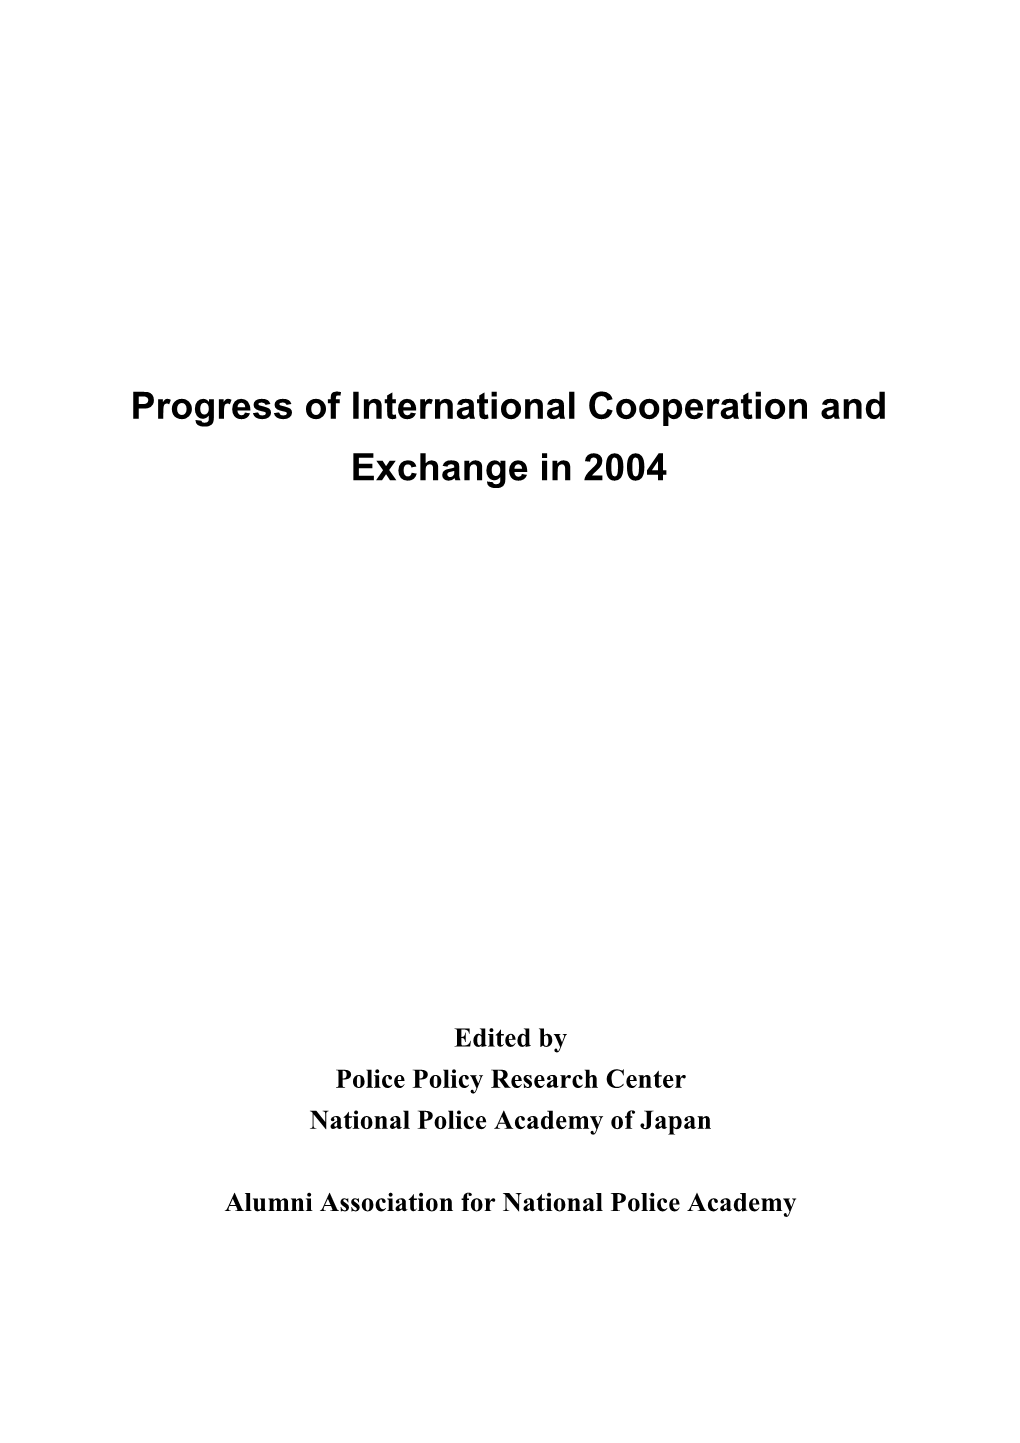 Progress of International Cooperation and Exchange in 2004